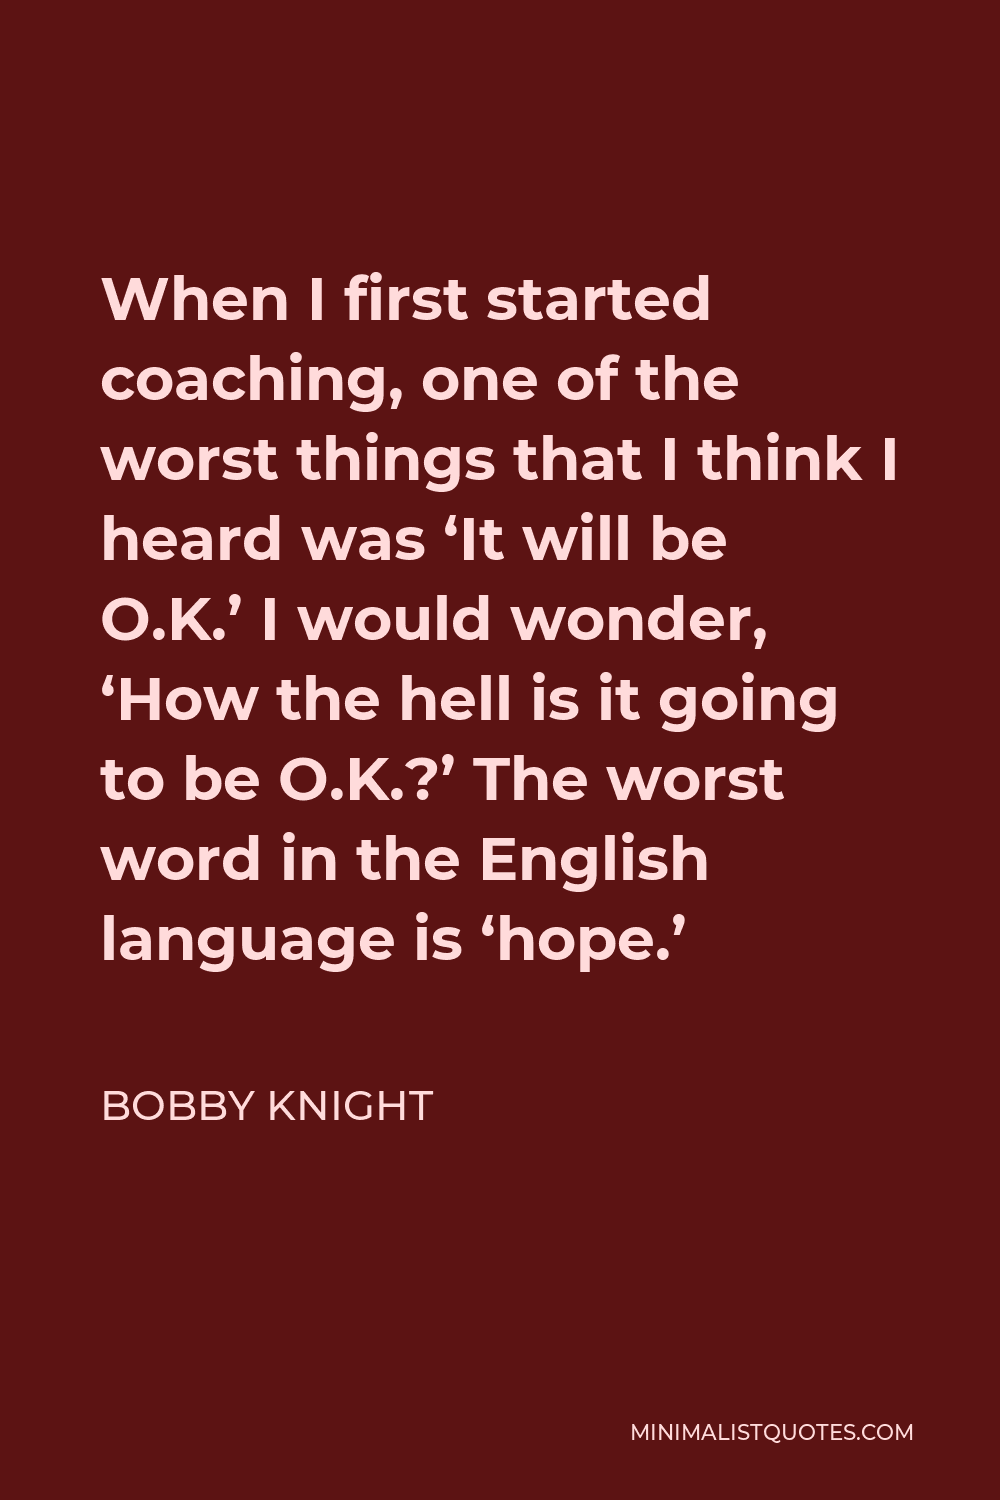 Bobby Knight Quote - When I first started coaching, one of the worst things that I think I heard was ‘It will be O.K.’ I would wonder, ‘How the hell is it going to be O.K.?’ The worst word in the English language is ‘hope.’